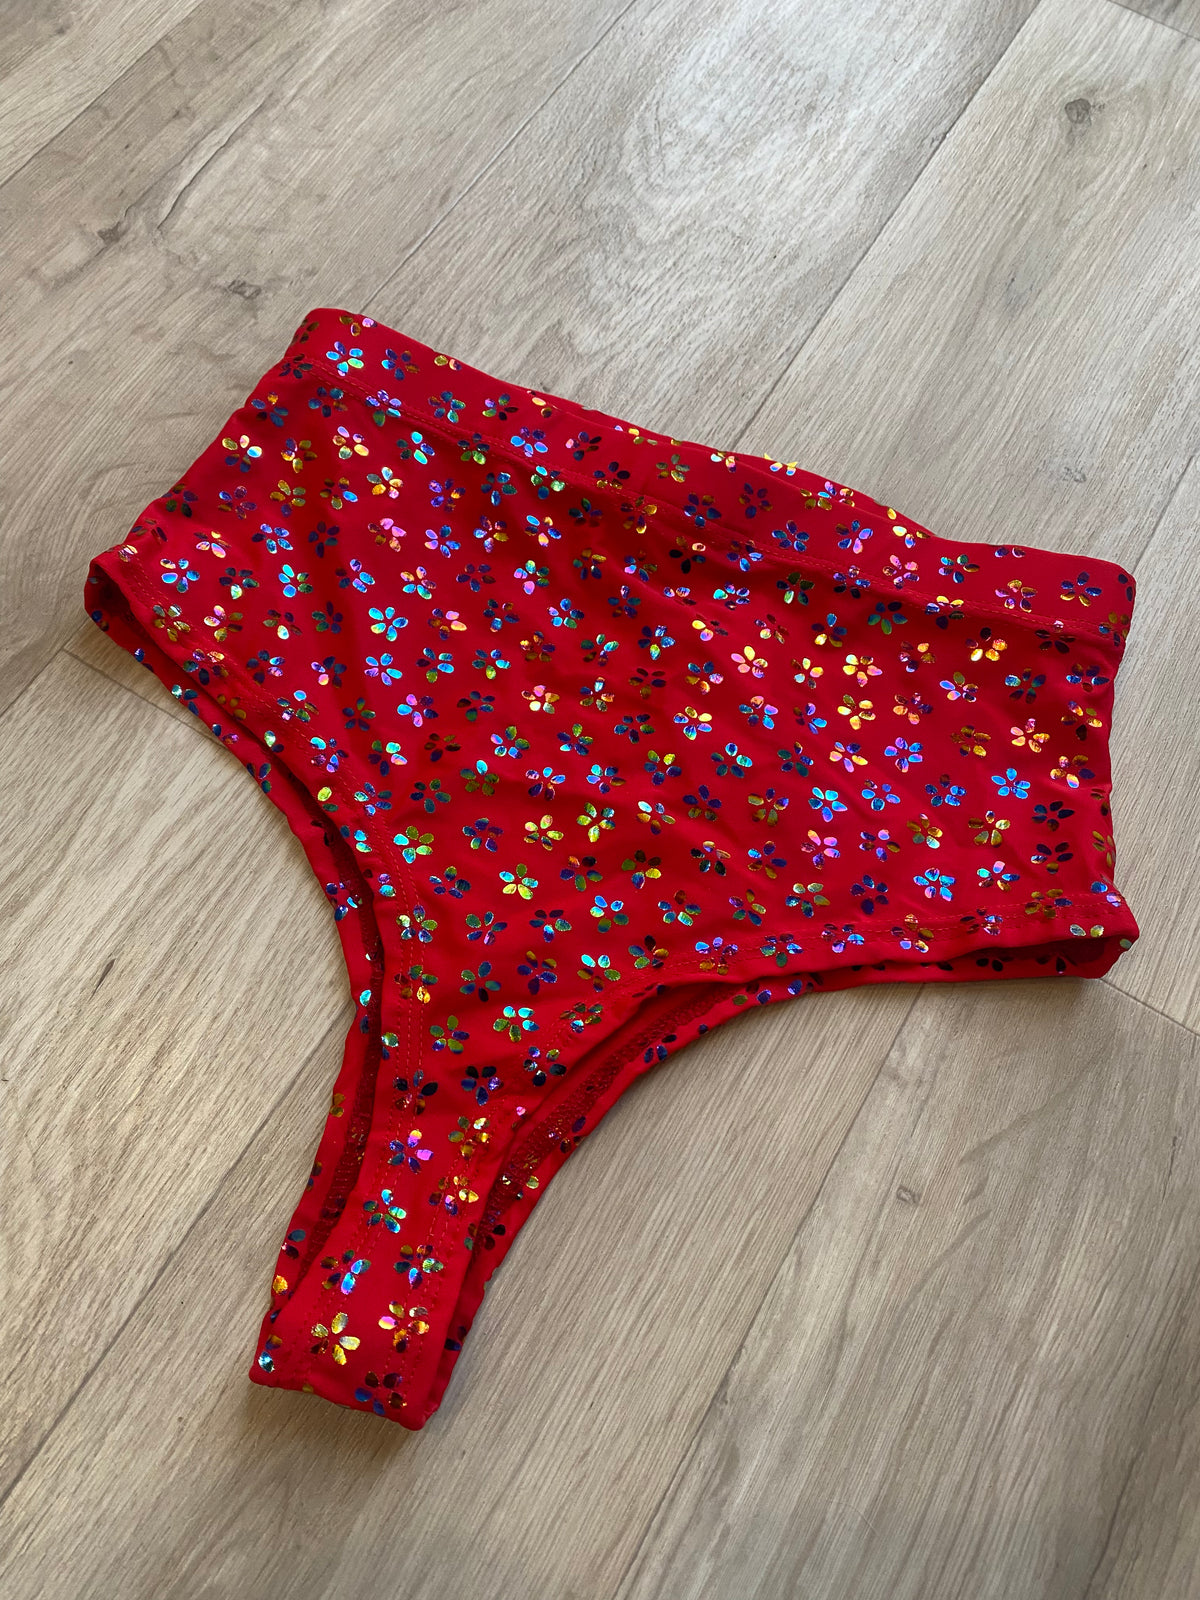 RED GYPSY STAR HIGH WAISTED CHEEKY BOTTOMS SIZE UK 8/US 4 SAMPLE SALE